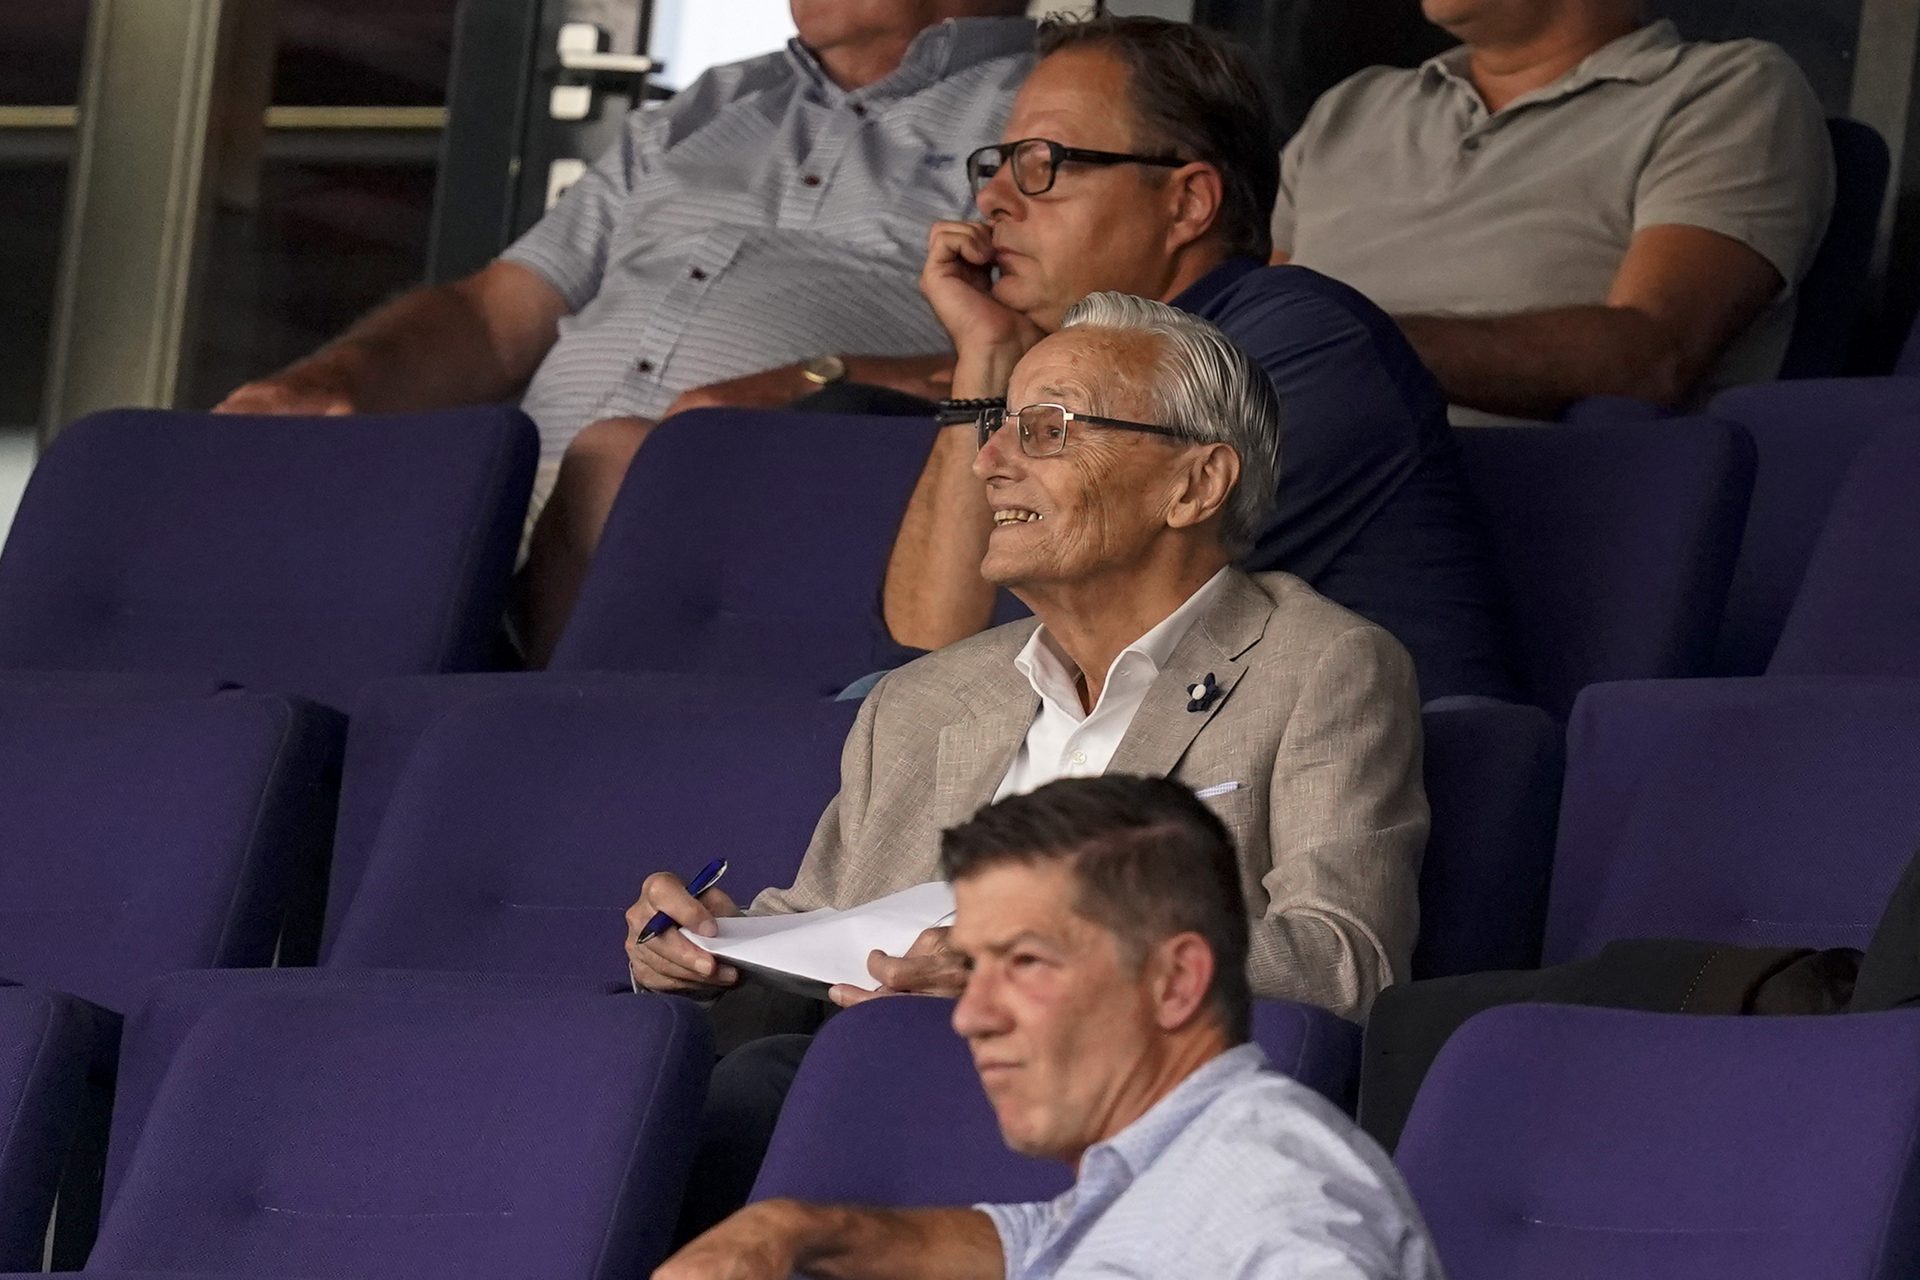 Scout at PSV Eindhoven